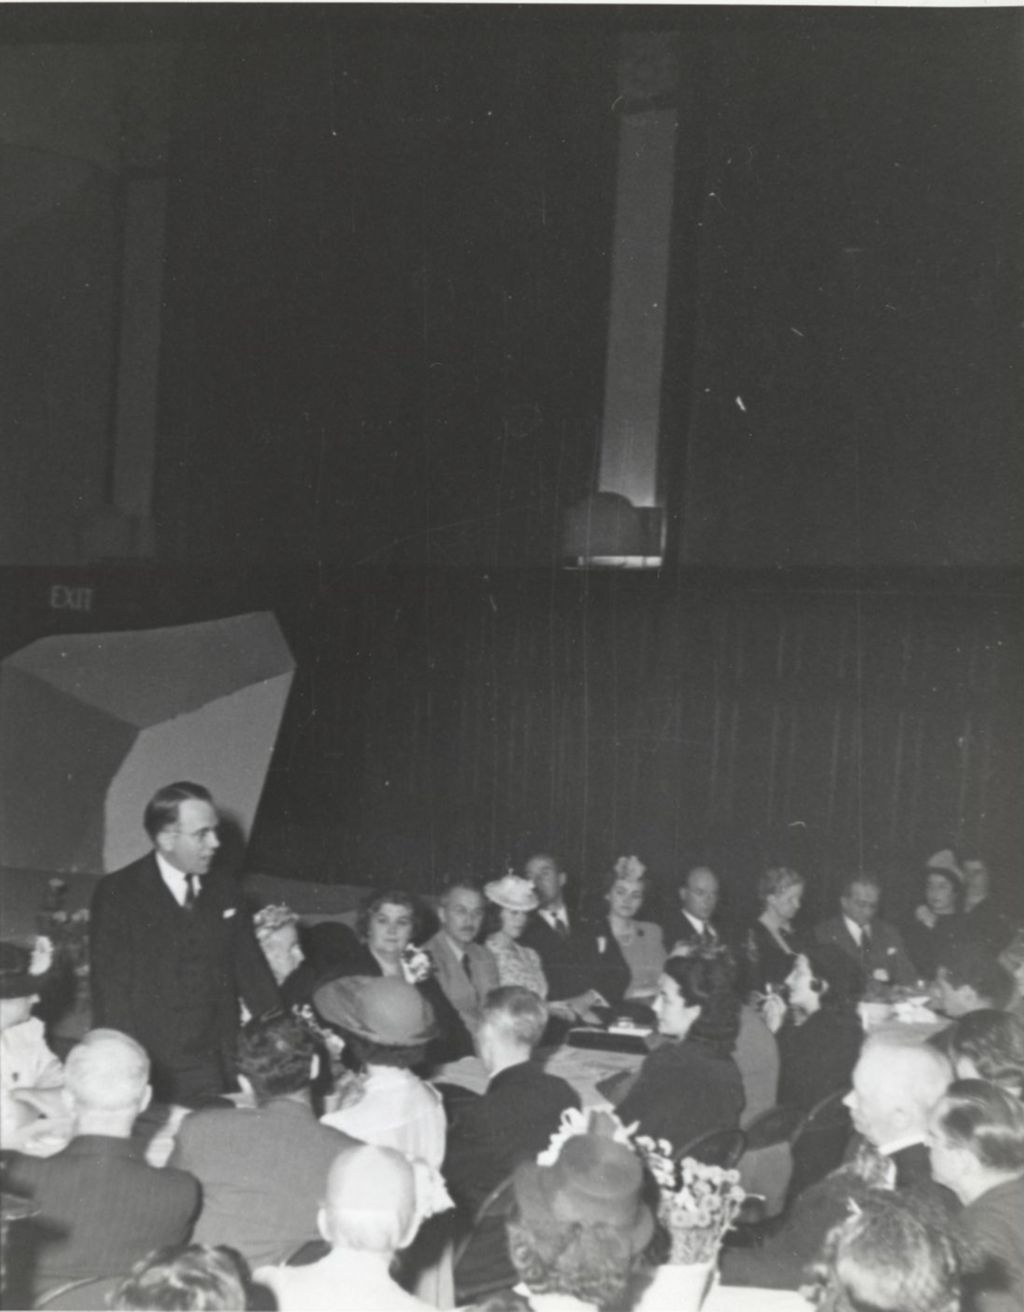 Miniature of Wayne McMillen addresses attendees at 1941 Hull-House Annual Dinner